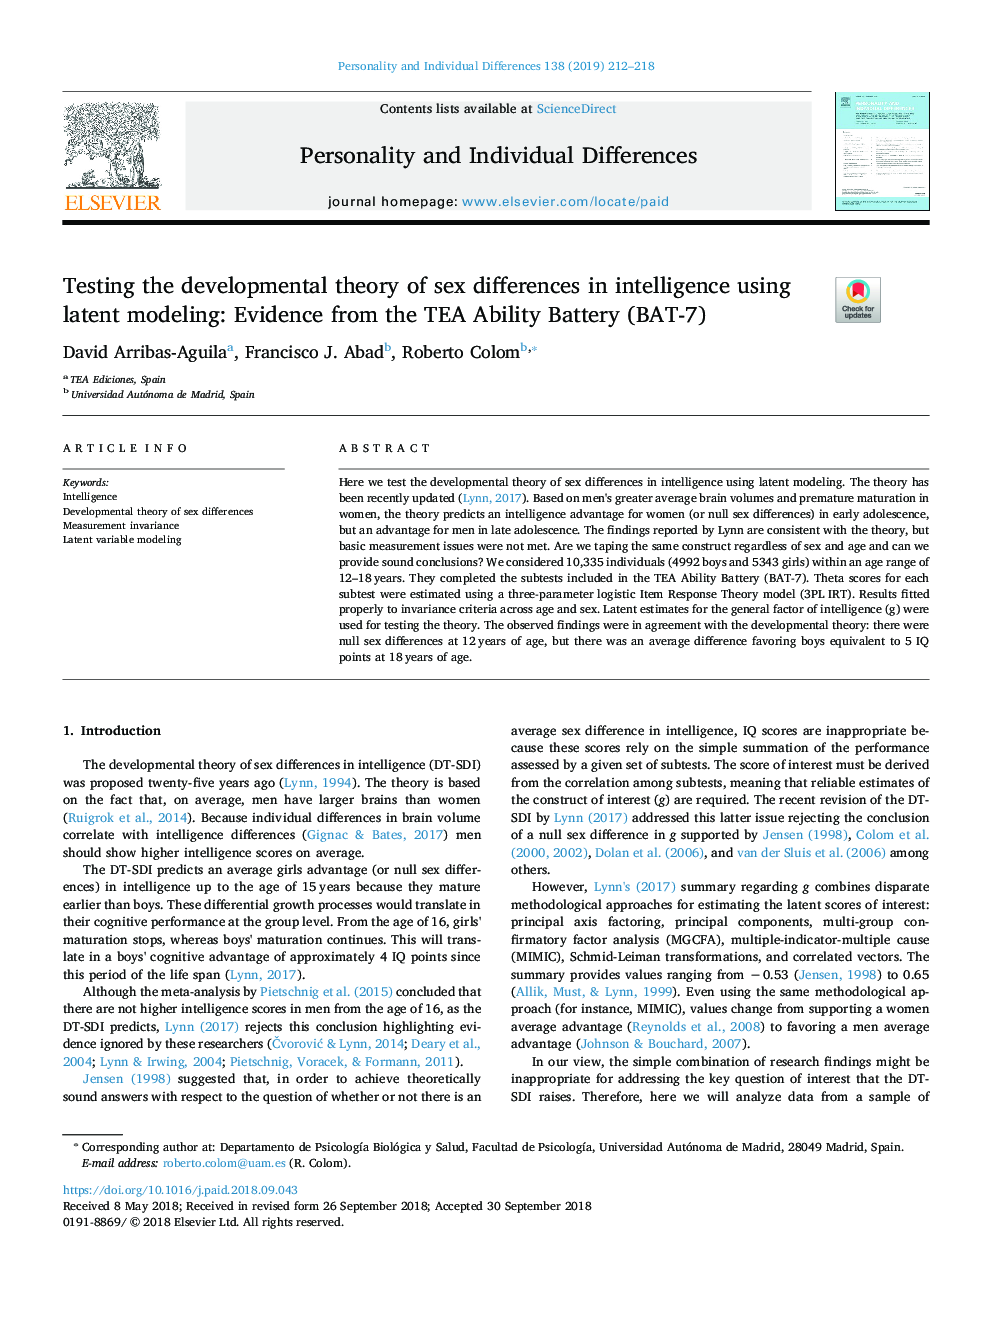 Testing the developmental theory of sex differences in intelligence using latent modeling: Evidence from the TEA Ability Battery (BAT-7)